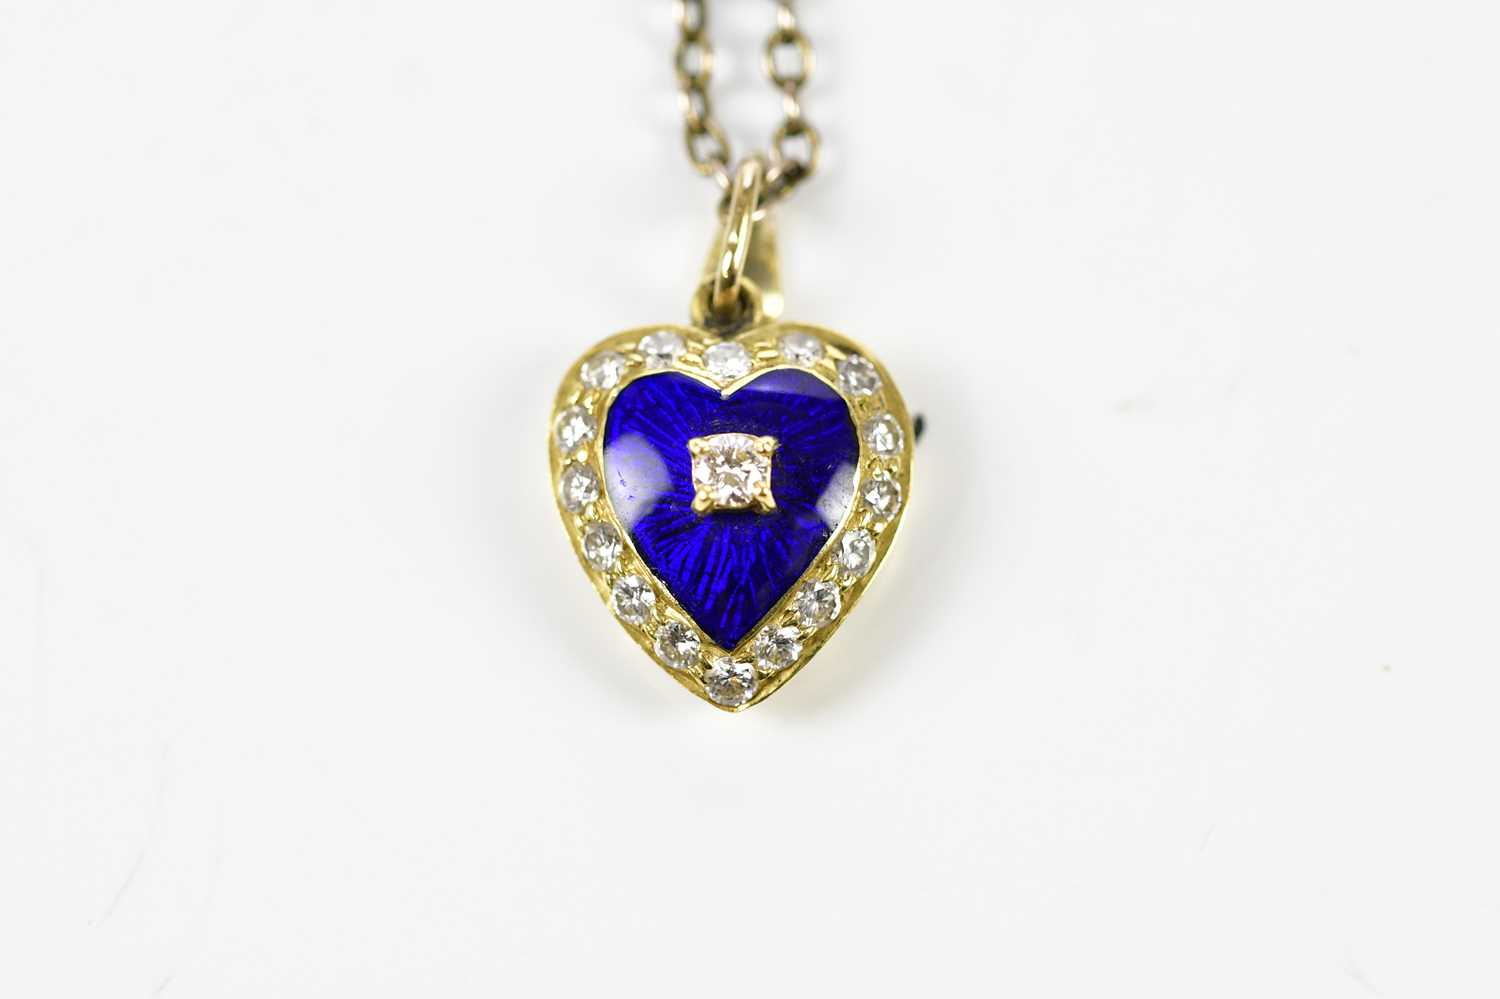 An 18ct yellow gold heart shaped pendant centred with a round brilliant cut diamond on a blue